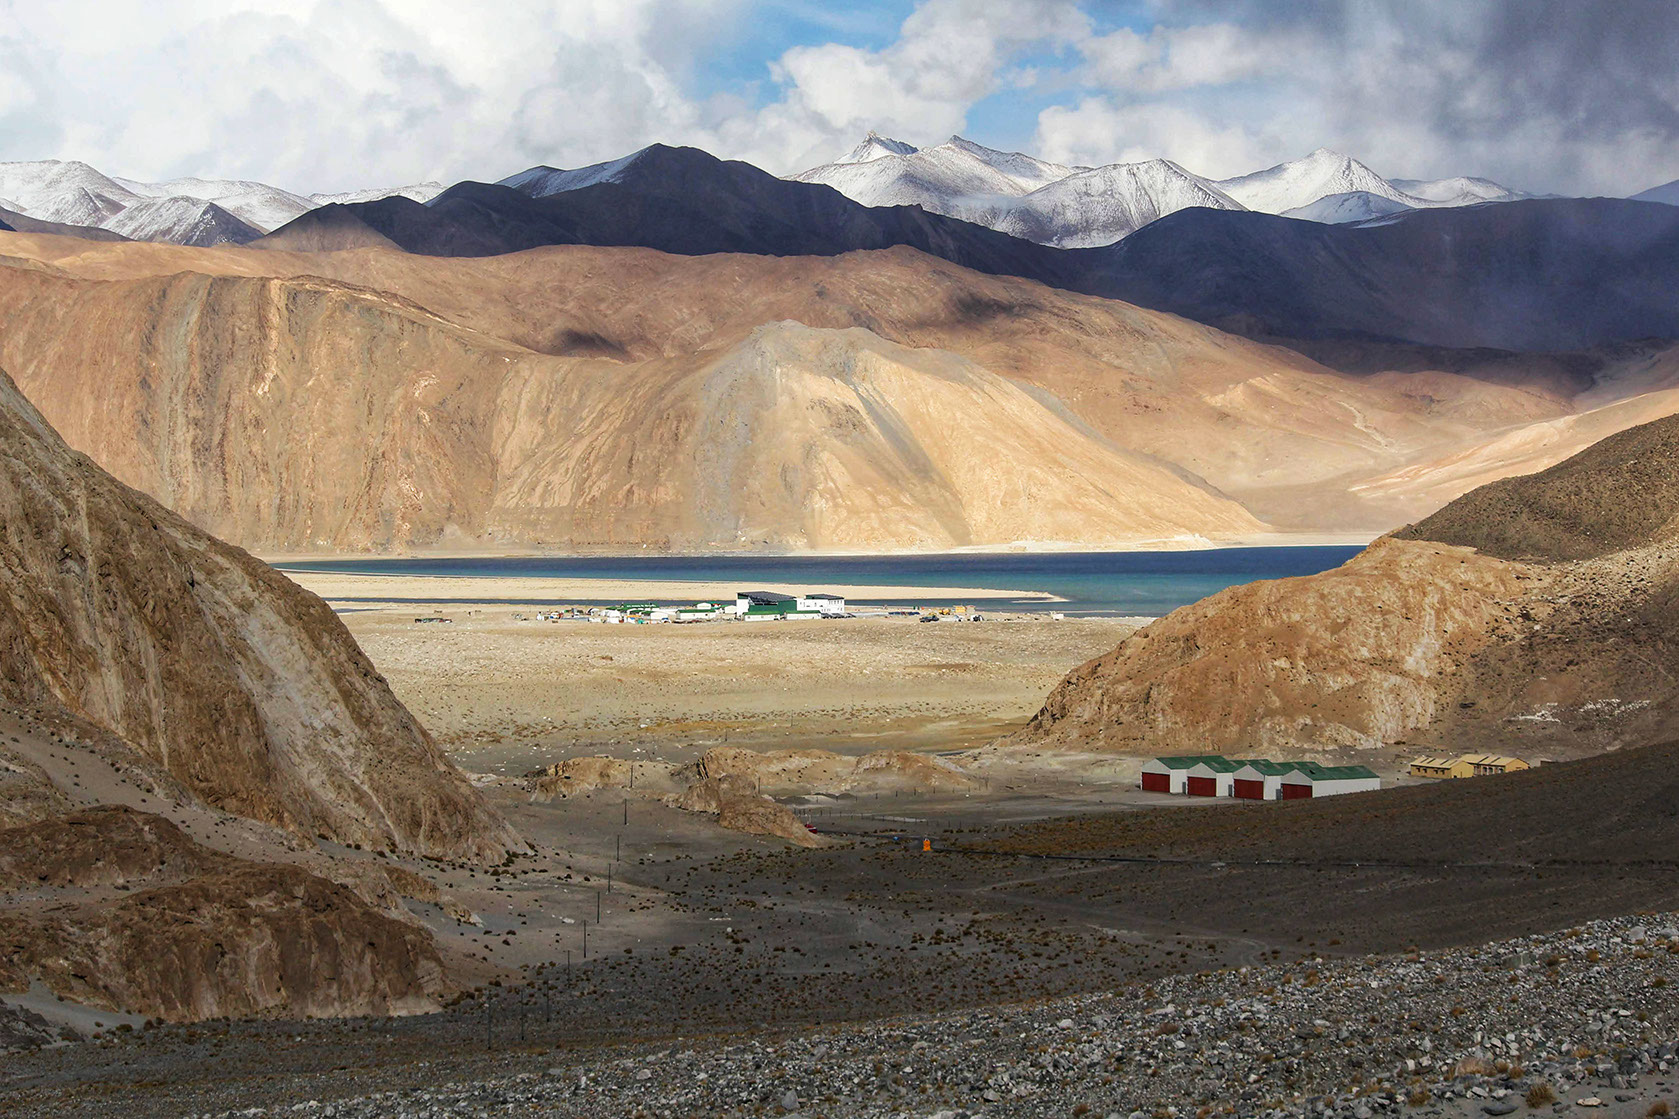 The magnificent Pangong Lake from a distance